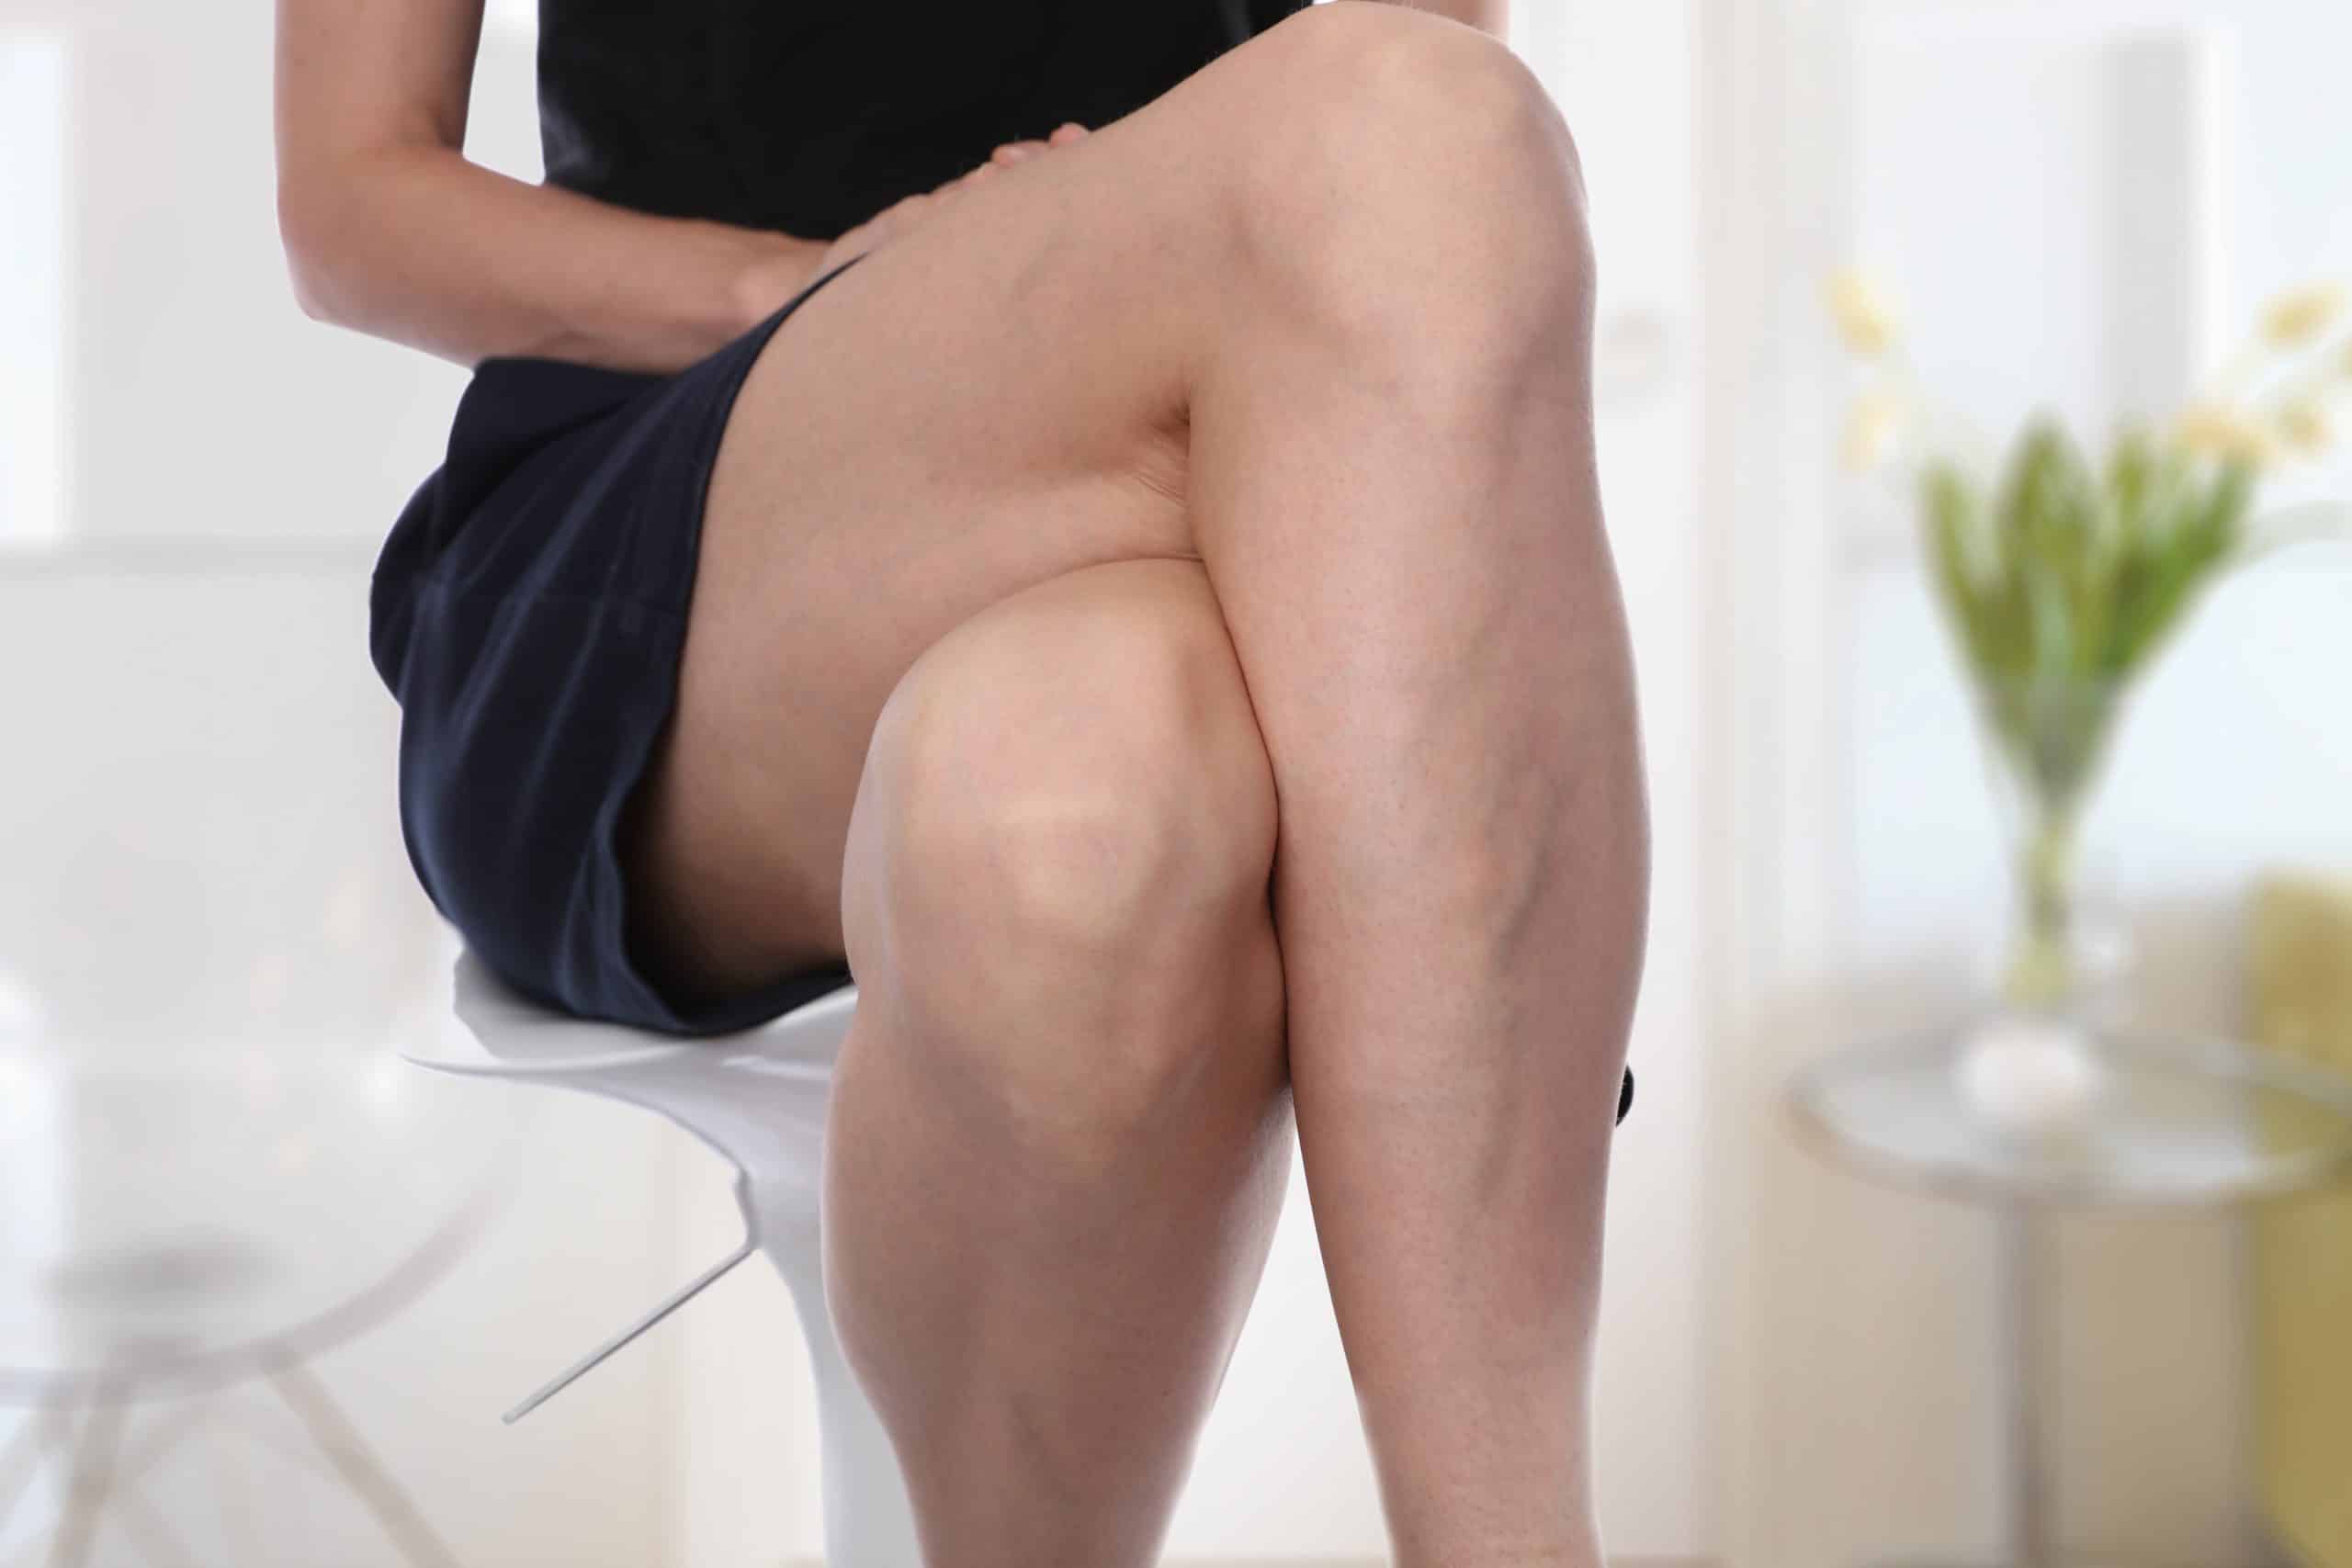 WHAT ARE SPIDER VEINS? WHAT IS THE BEST SPIDER VEIN REMOVAL?